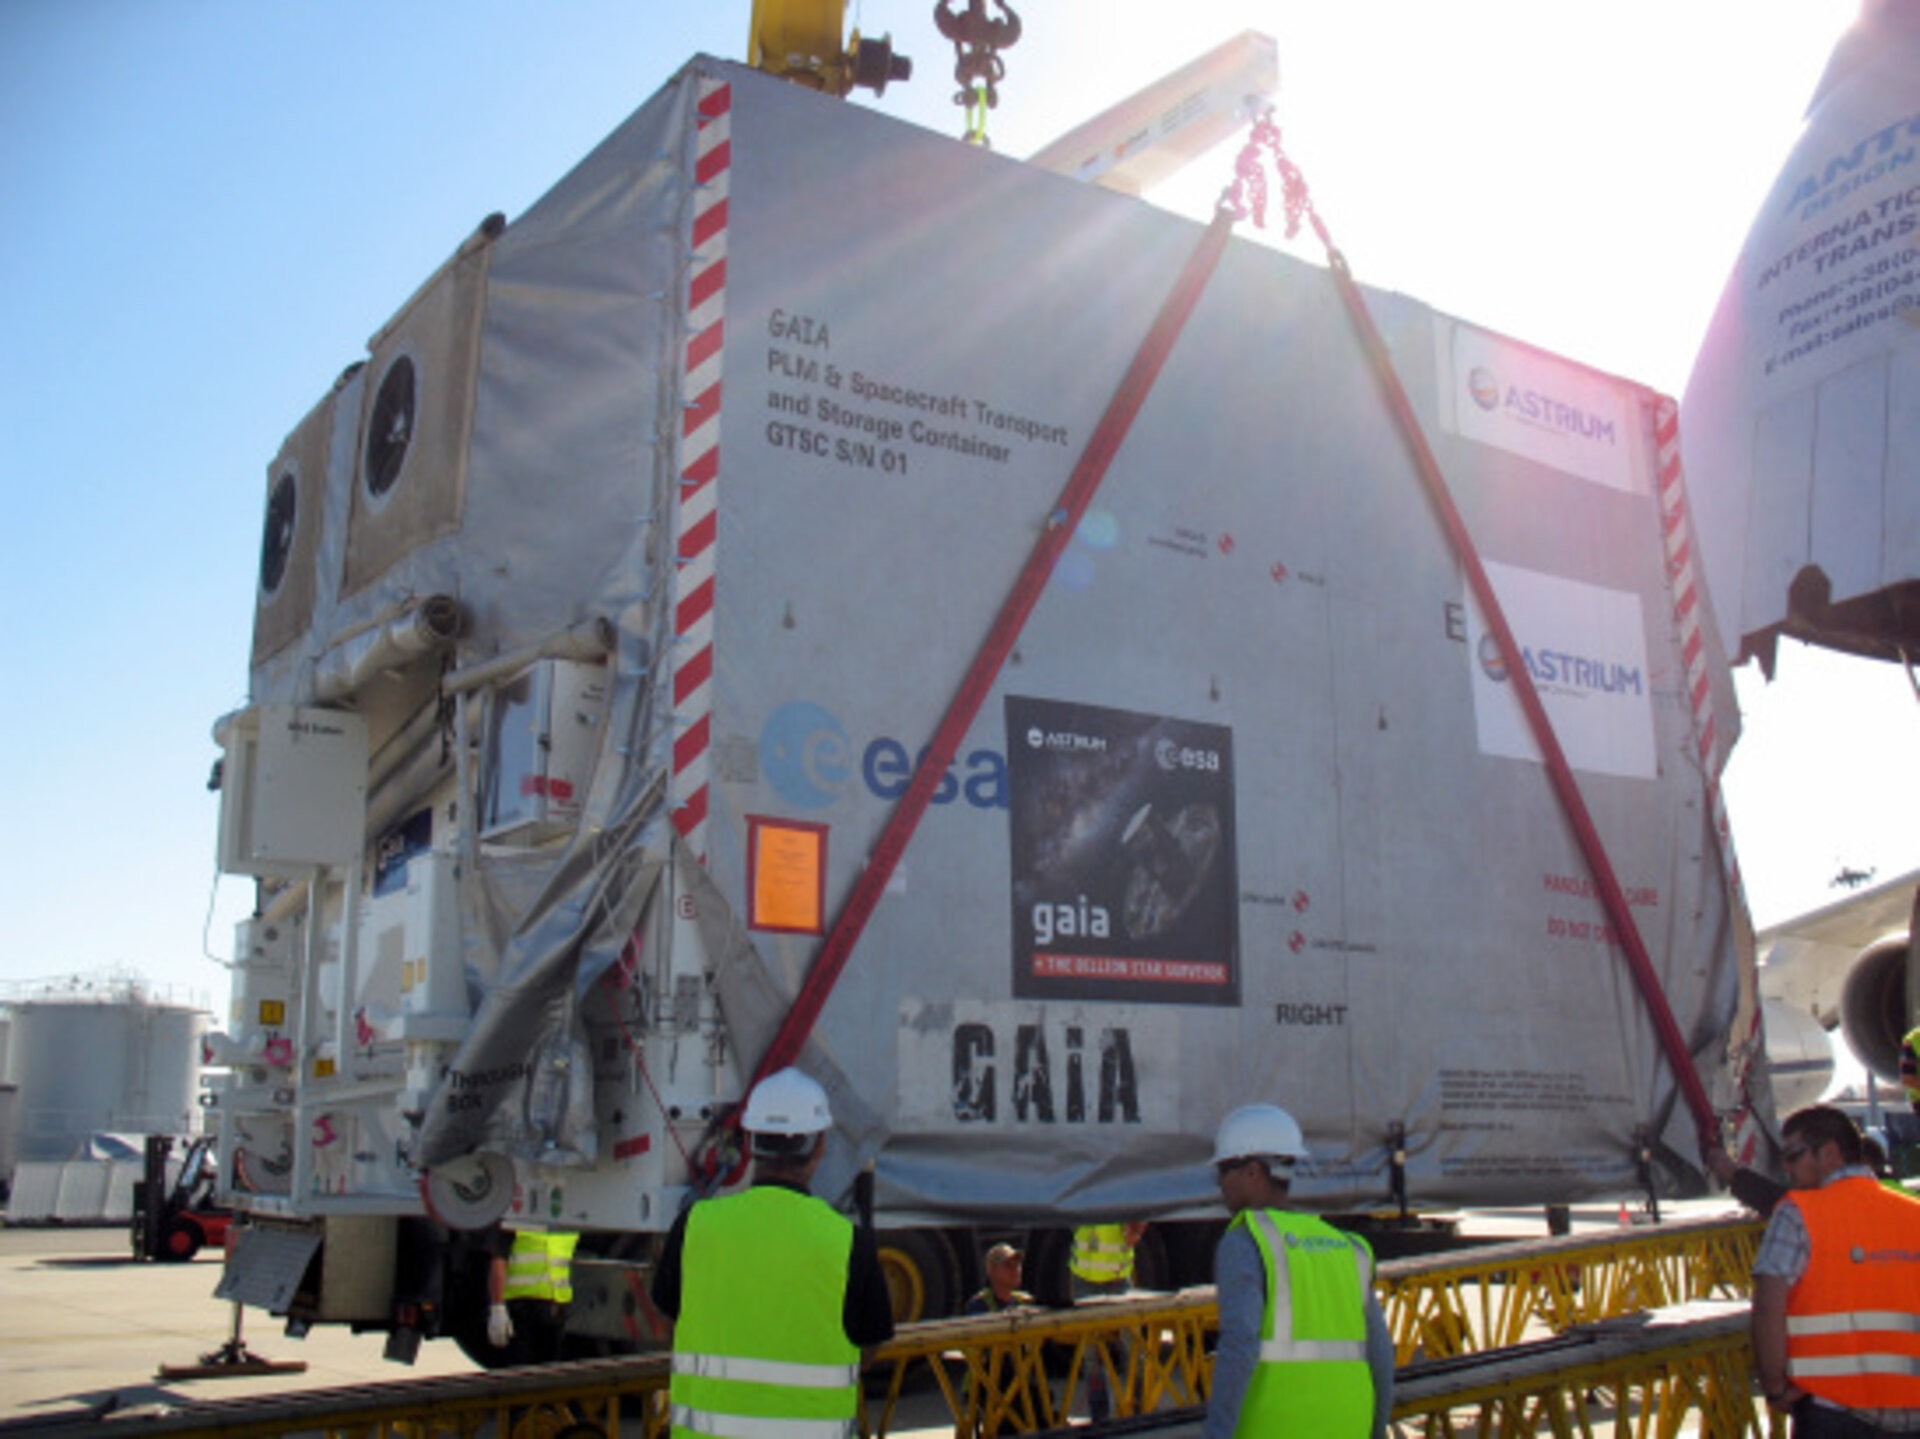 Placing the Gaia container onto the access ramp